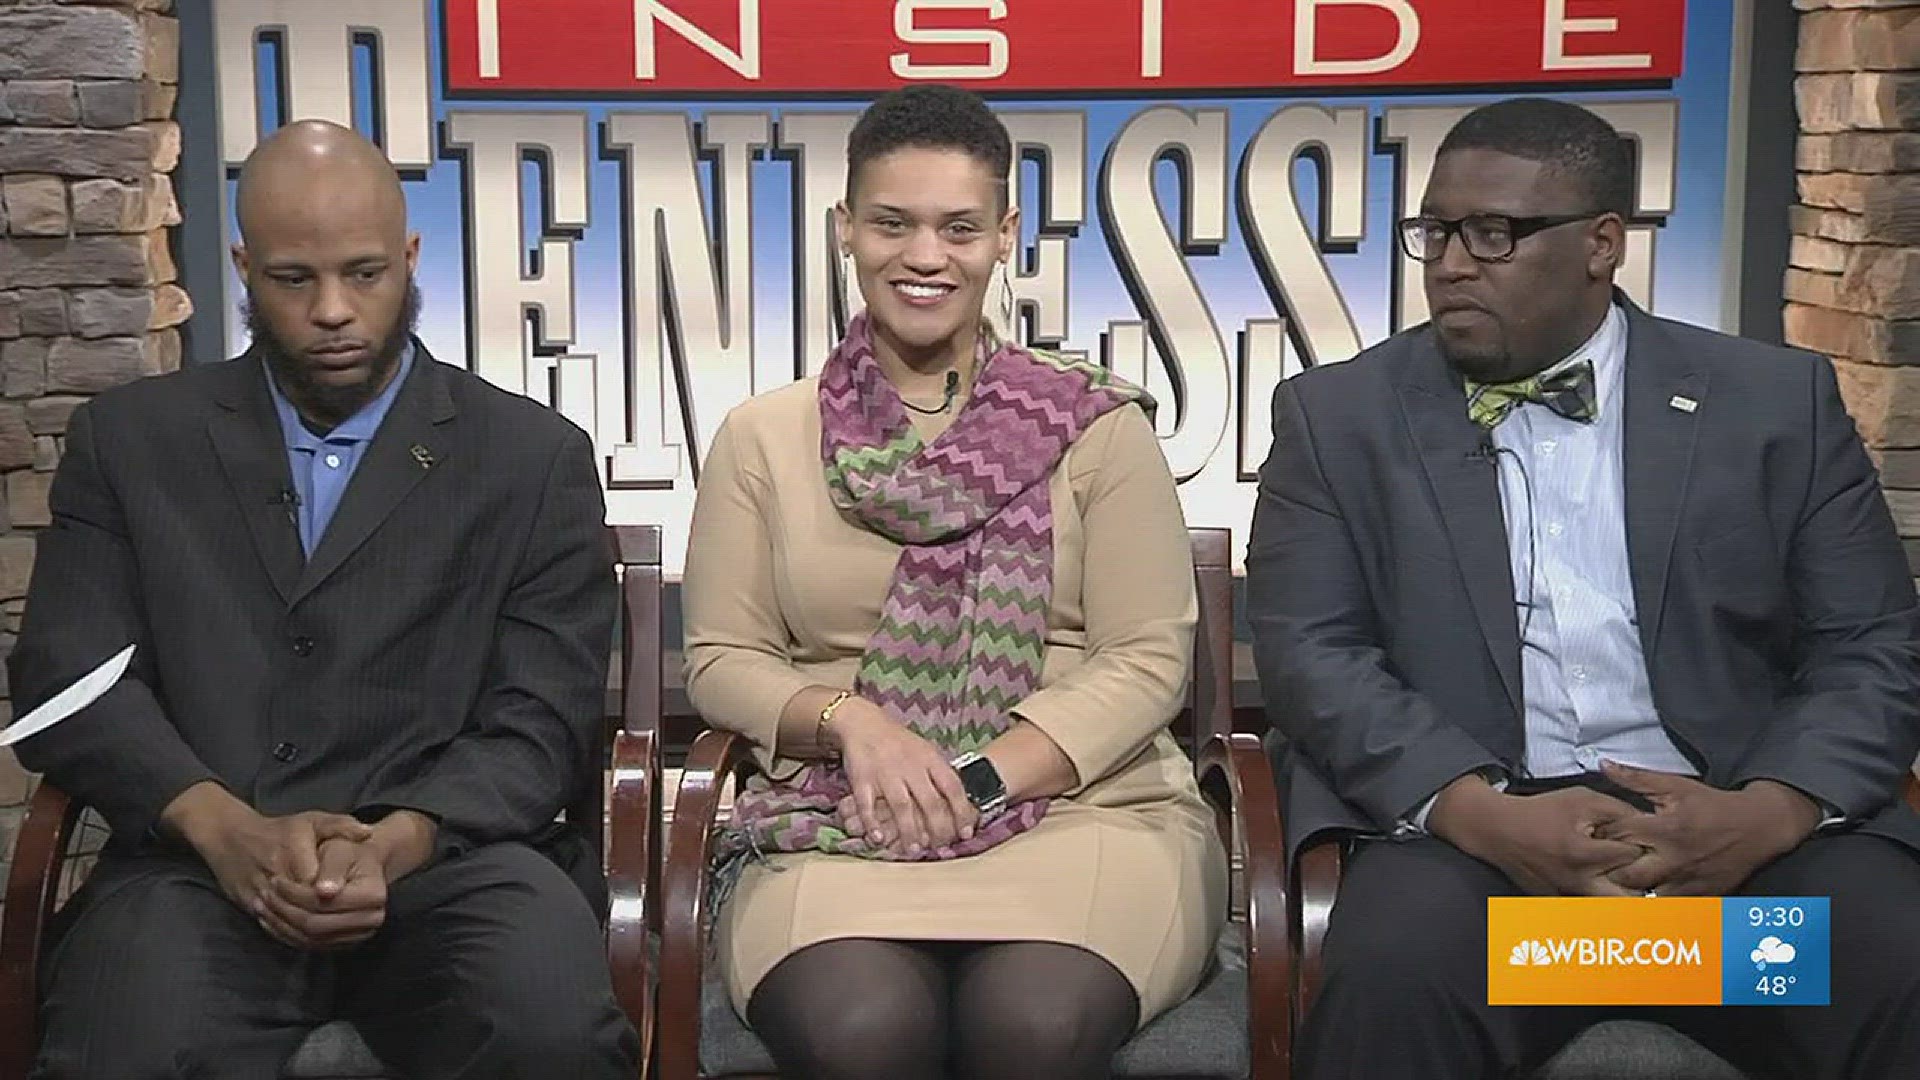 Knox County District 1 School Board candidates Andre Canty, Evetty Satterfield and D.L. Jaggers talk about the race.